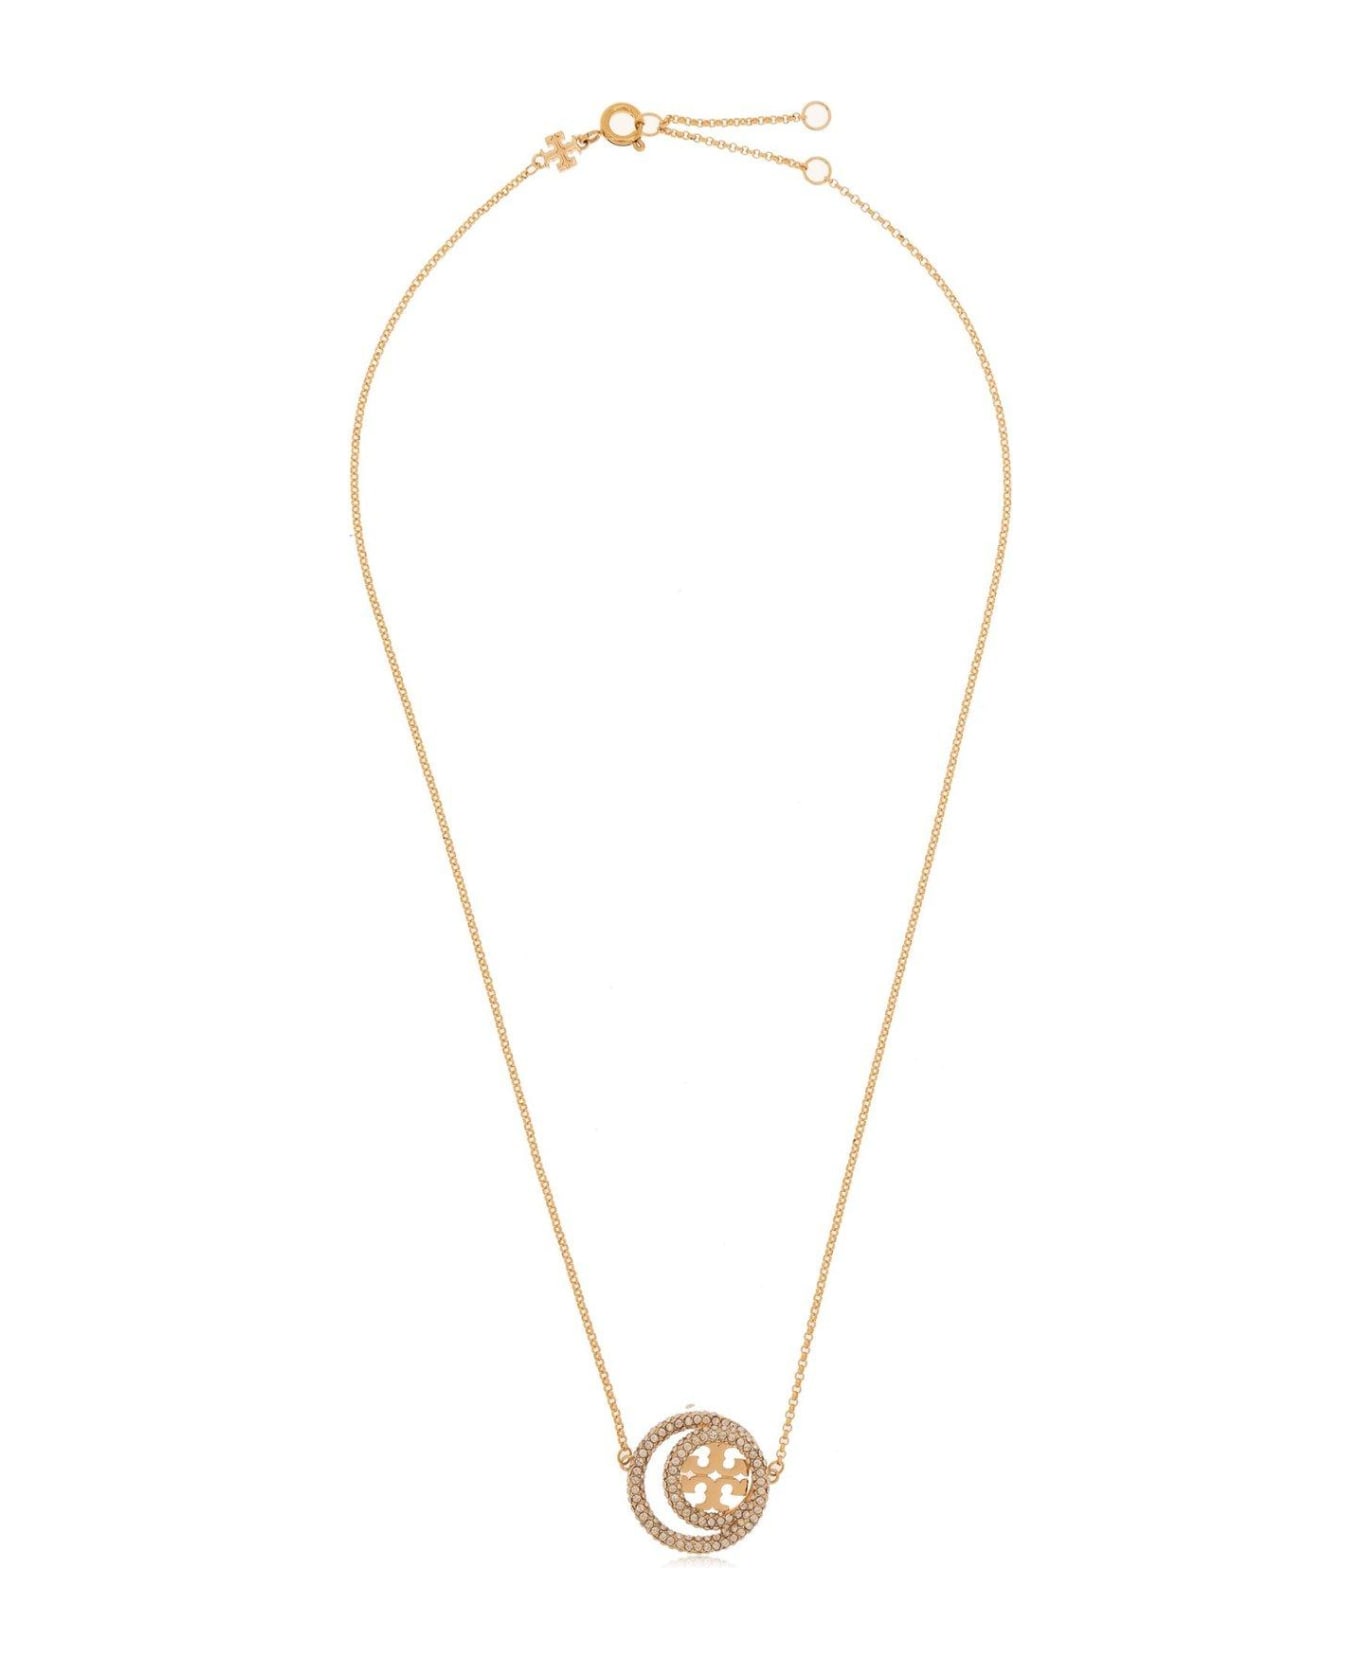 Tory Burch Miller Double Ring Pendant Embellished Necklace - Gold/crystal